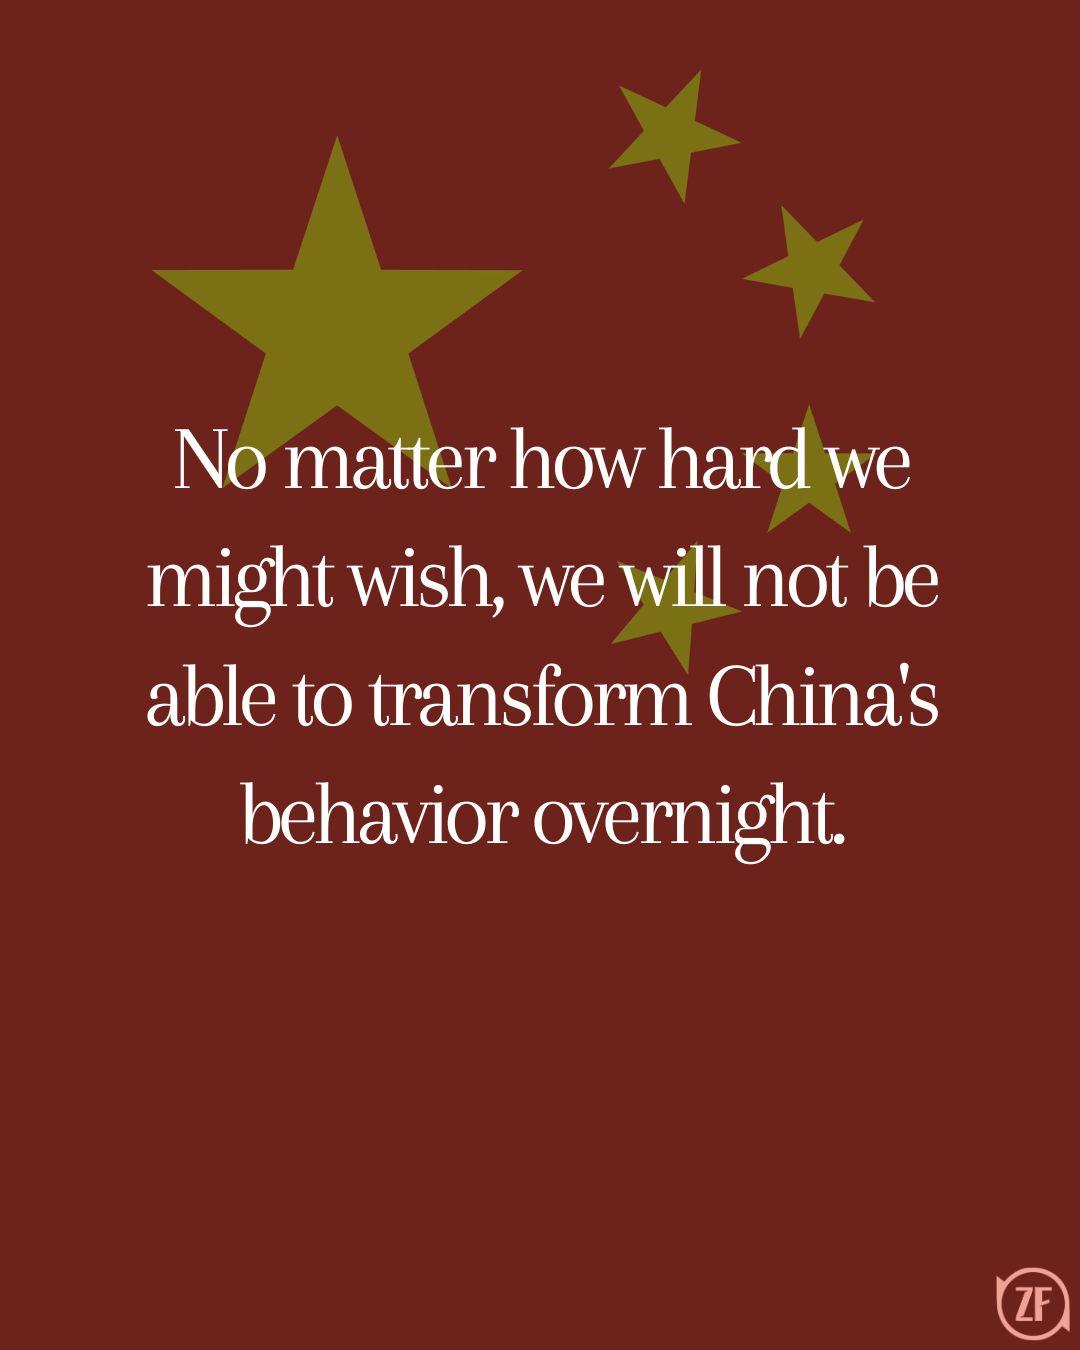 No matter how hard we might wish, we will not be able to transform China's behavior overnight.